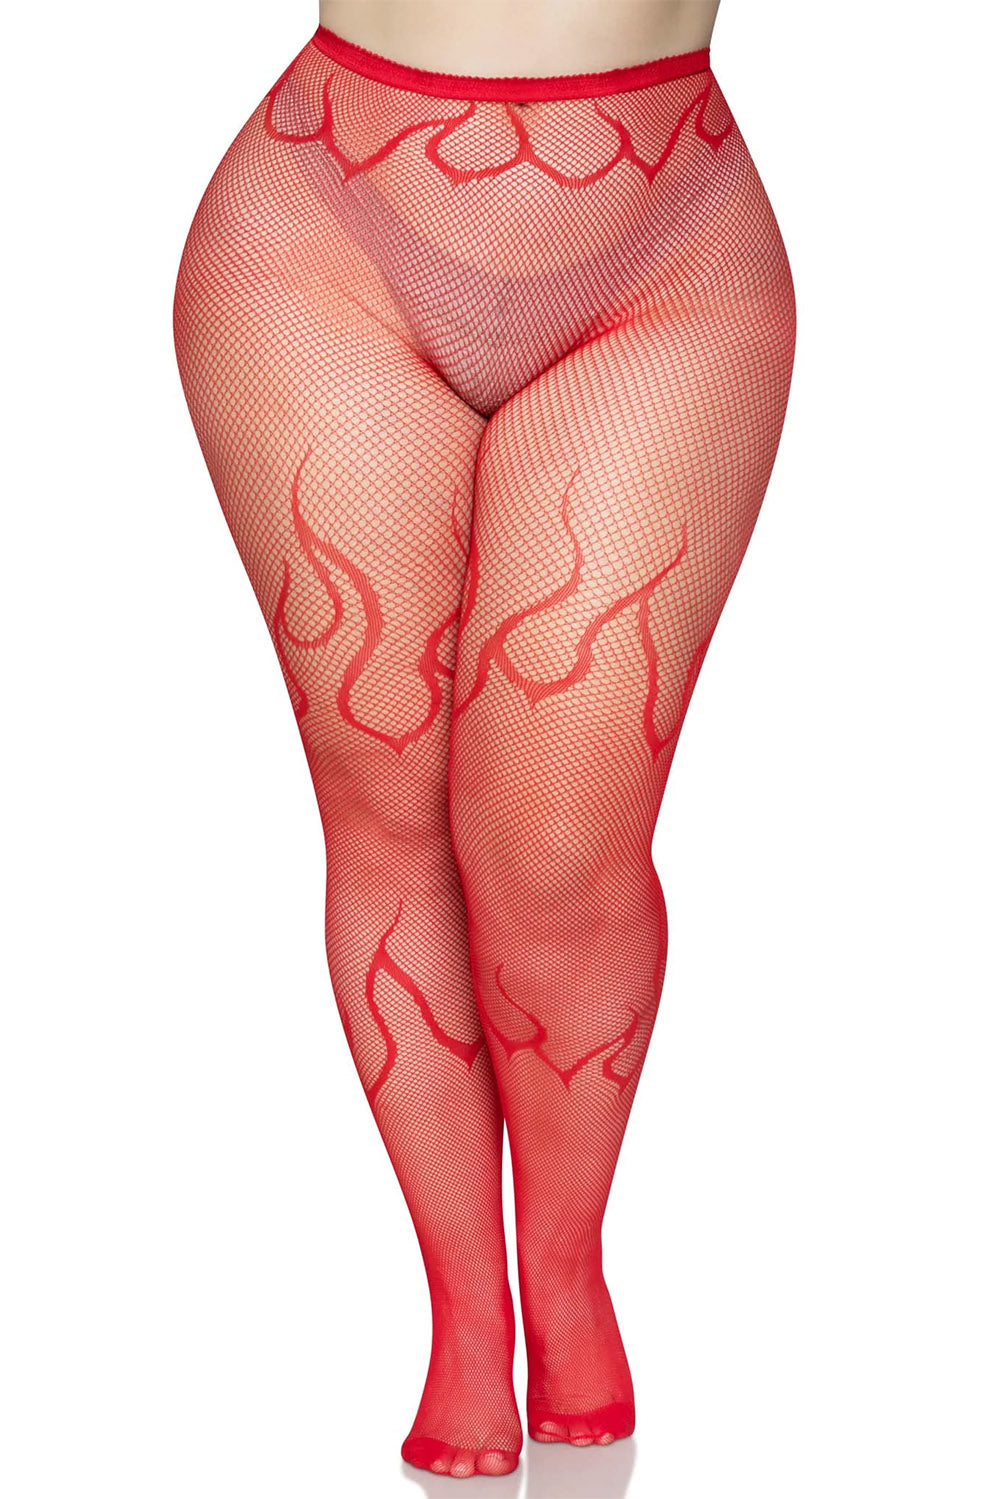 Flame Net Tights [Plus Size] [Red]